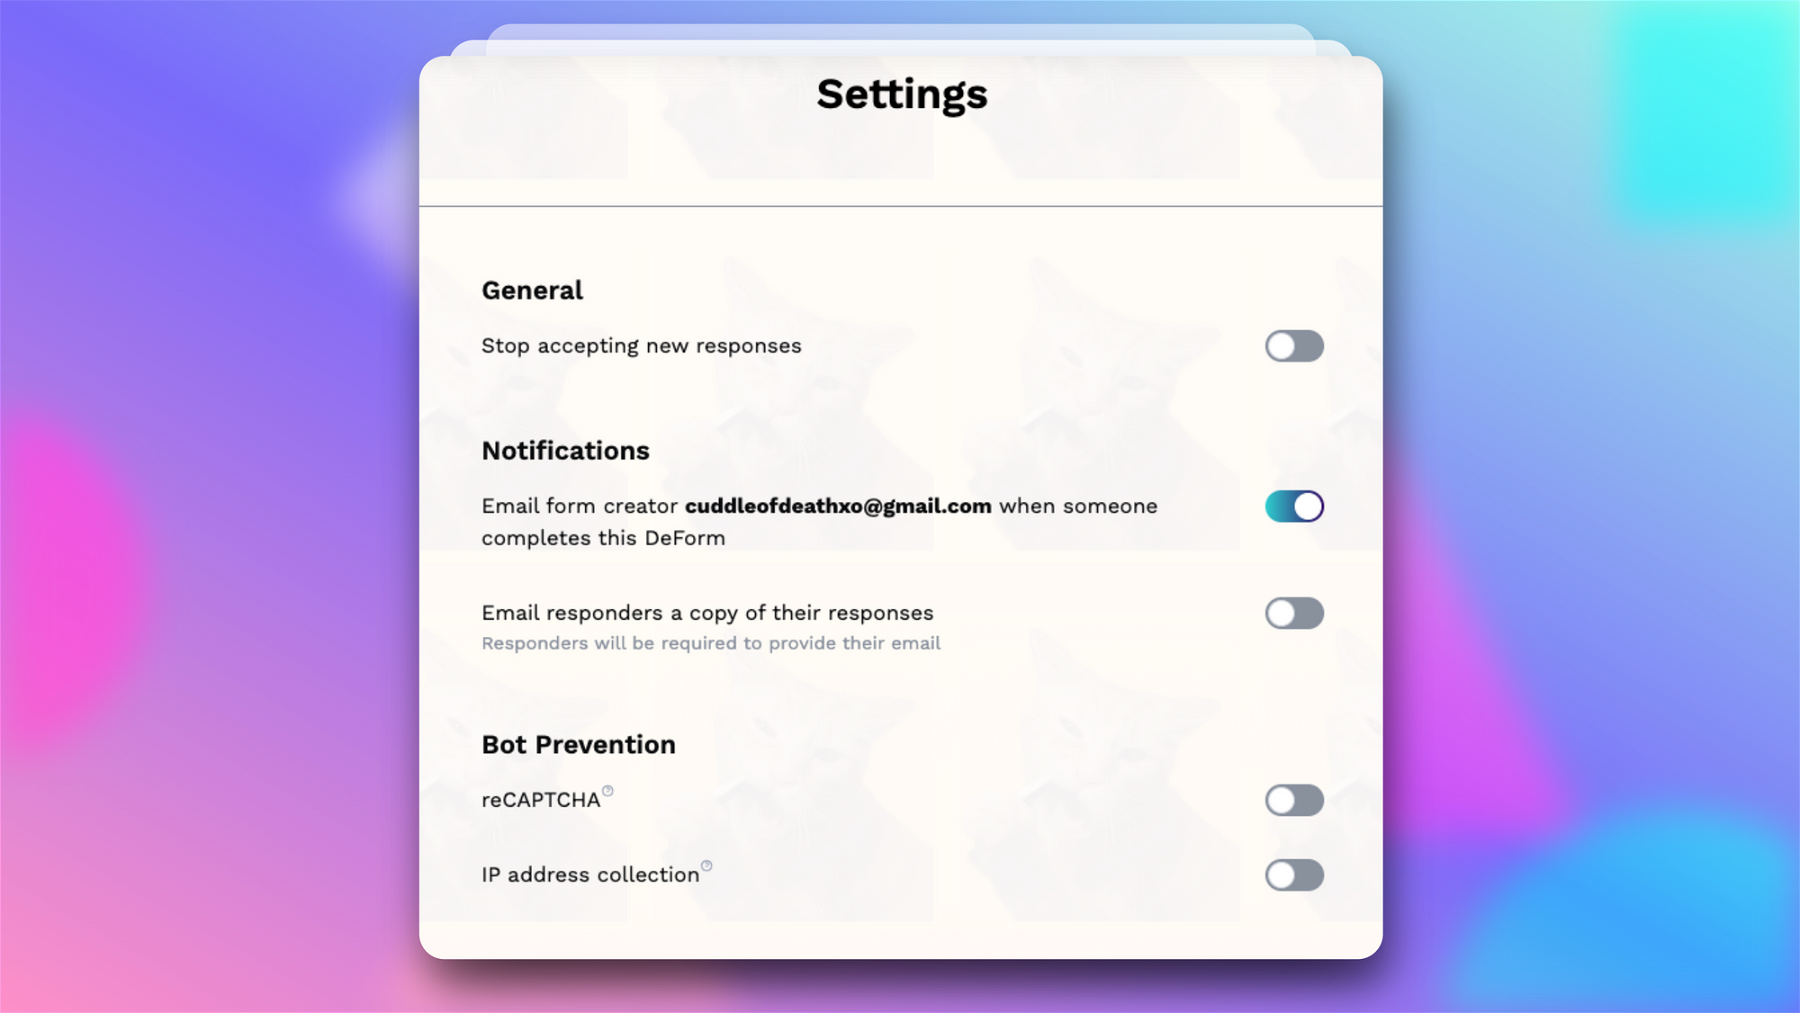 You can customize additional form settings by navigating to the Settings page from the navigation bar on the left side of the DeForm editor. Here, you’ll find useful settings like the feature to stop accepting responses, to receive email notifications, bot prevention options, and more. 